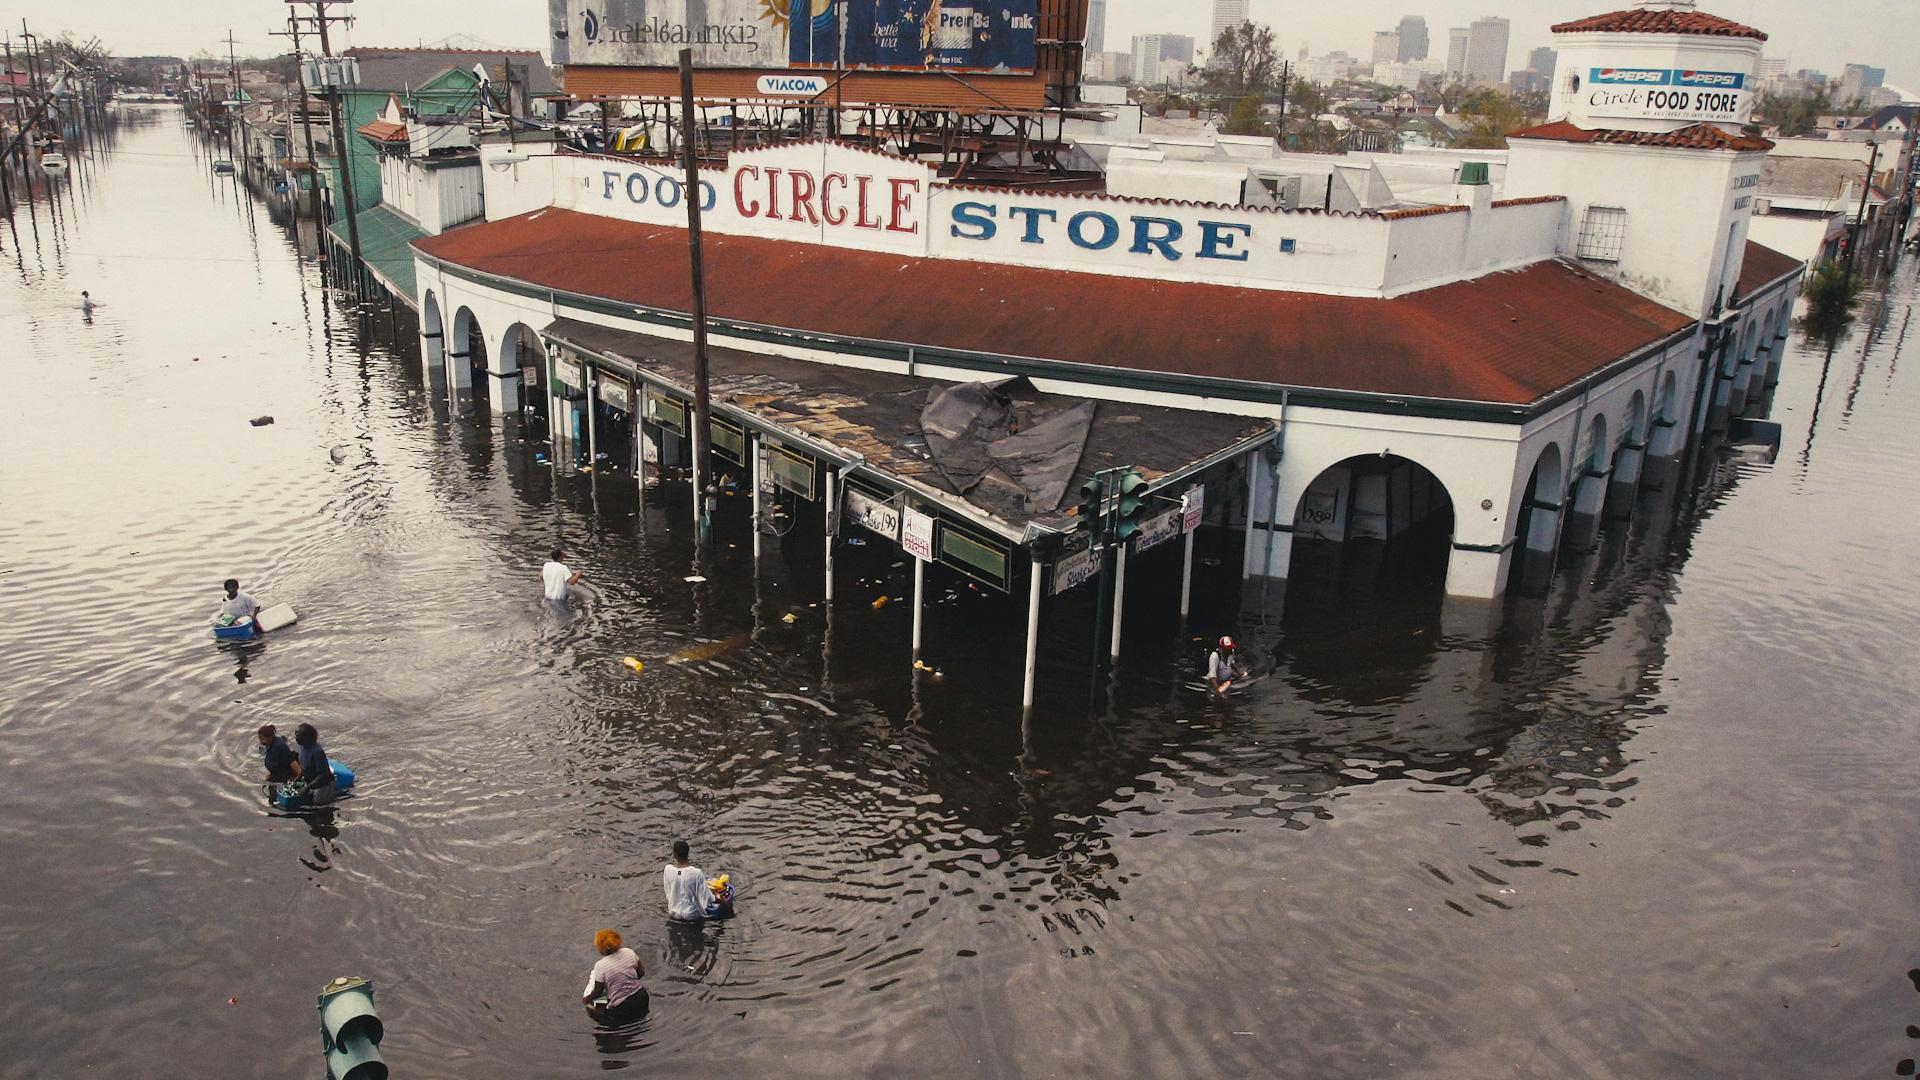 A store in the film director's neighborhood in New Orleans waist-deep in flood waters. People move through the water nearby.